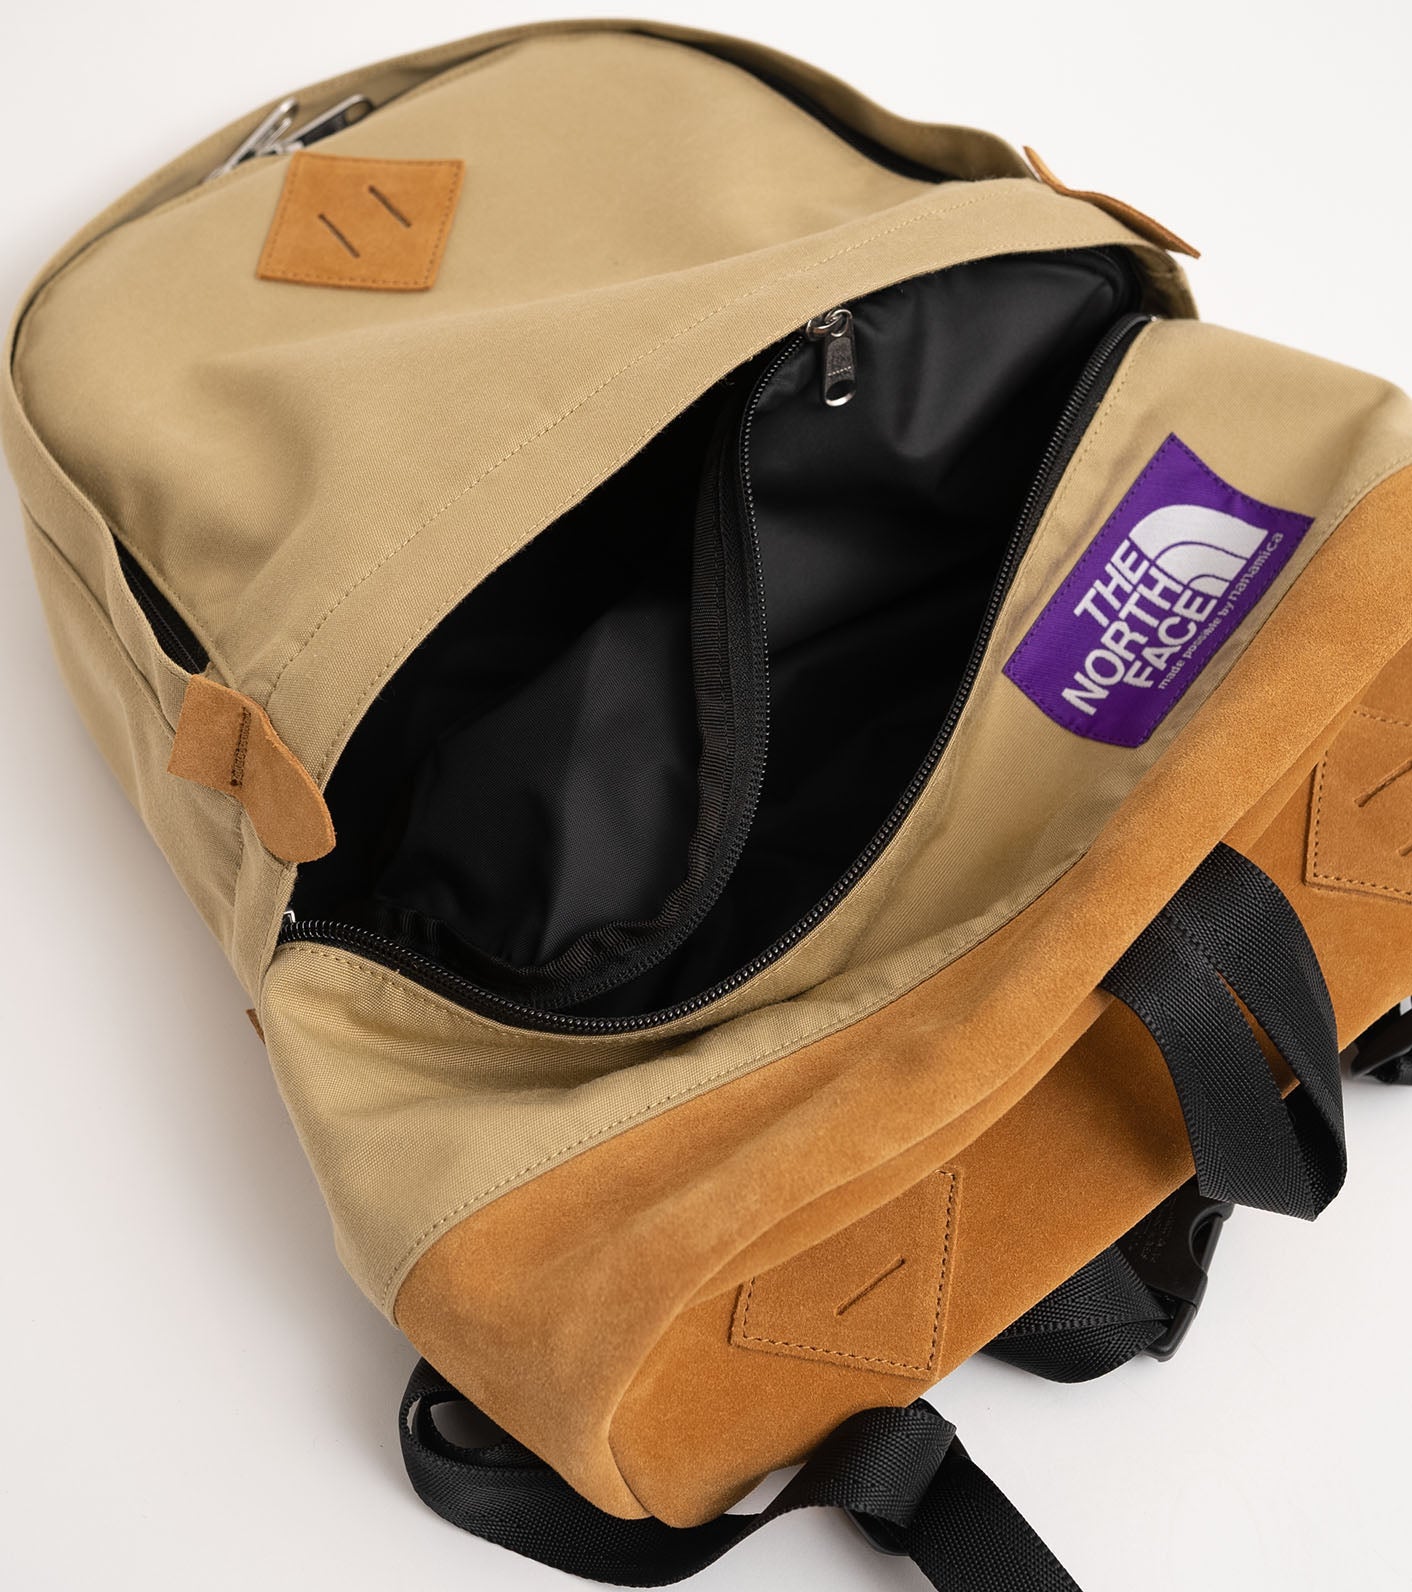 THE NORTH FACE PURPLE LABEL Medium Day Pack